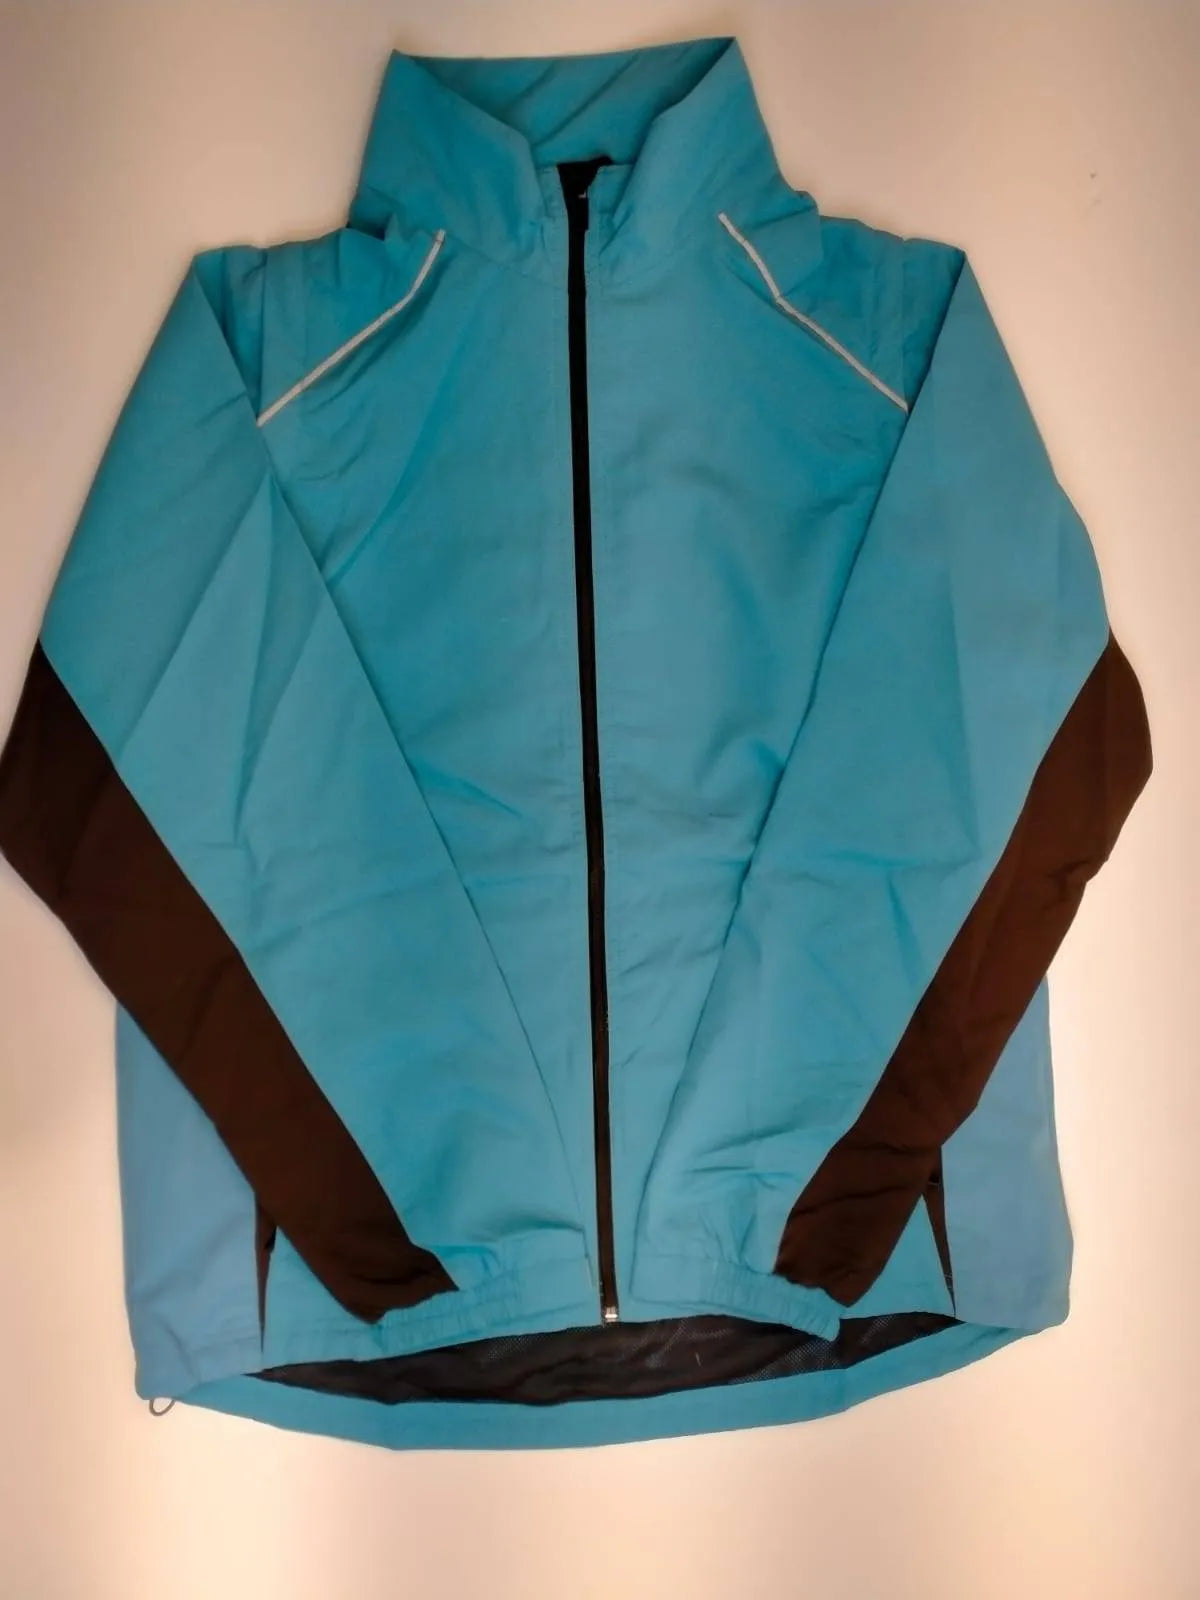 Toptex Walking Jacket: Stay dry & comfortable on your adventures (mention size if relevant).Consider mentioning specific features like pockets, hood, ventilation, etc. if applicable.